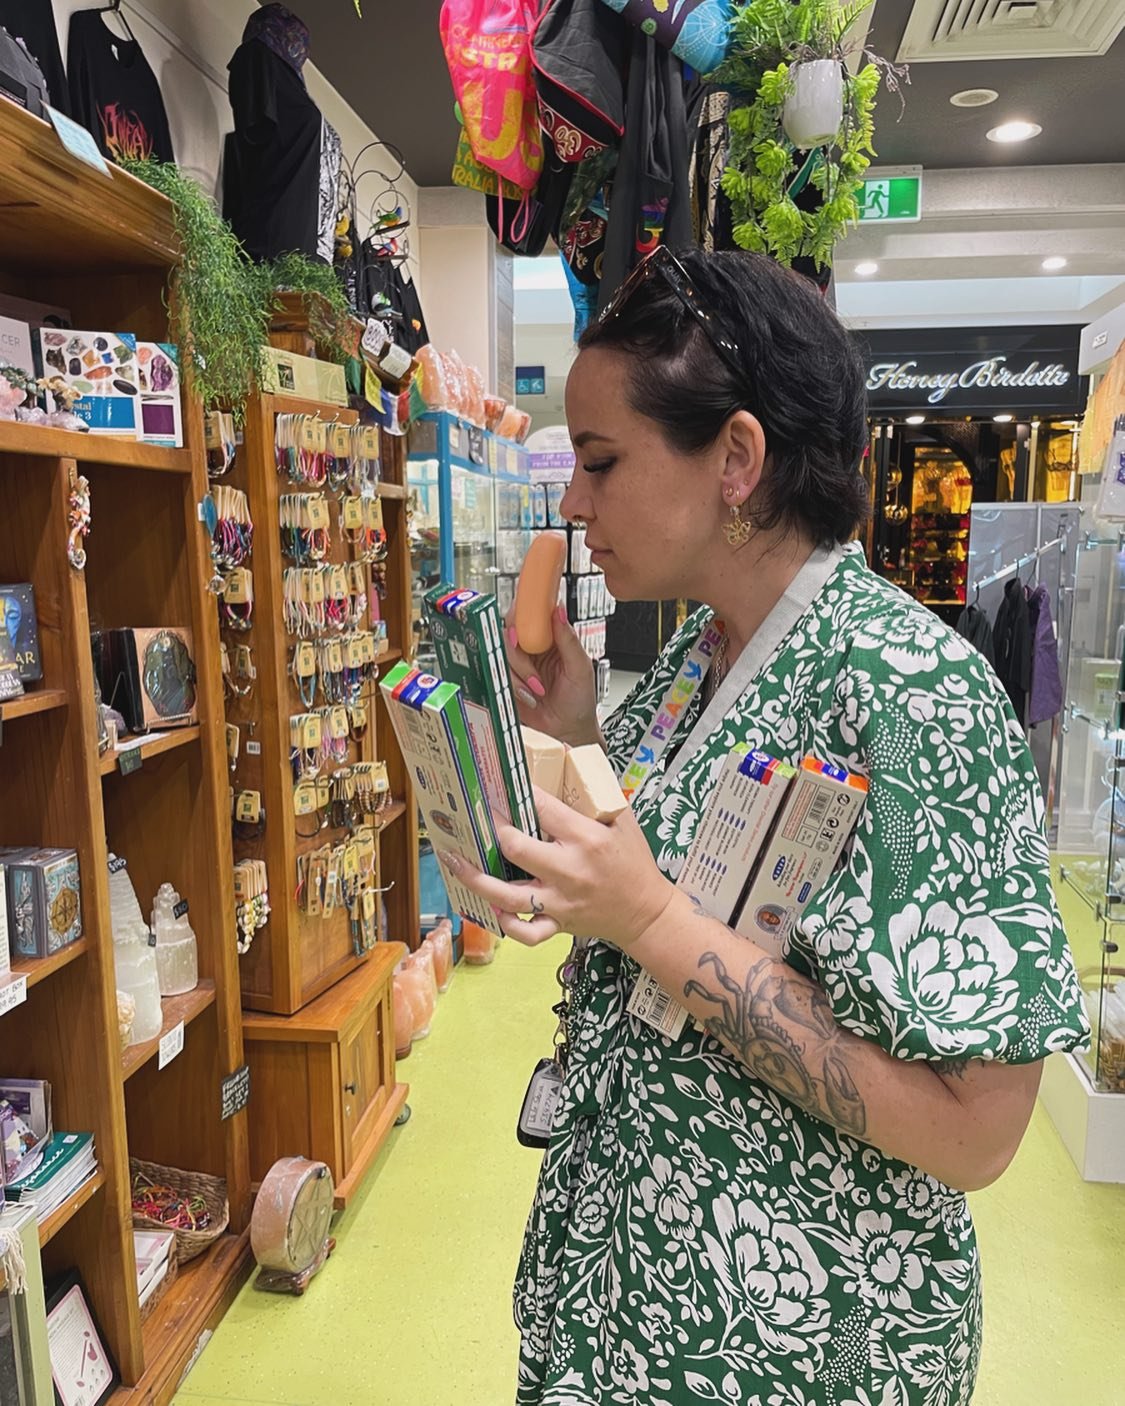 GOODMORNING!! Today we have Chelsi piercing from now - 5:30pm 🪡 with Kat helping you stock up on your favourite incense behind the counter! 🍄 or come get a reading with Sarah from now - 4pm!! 🔮